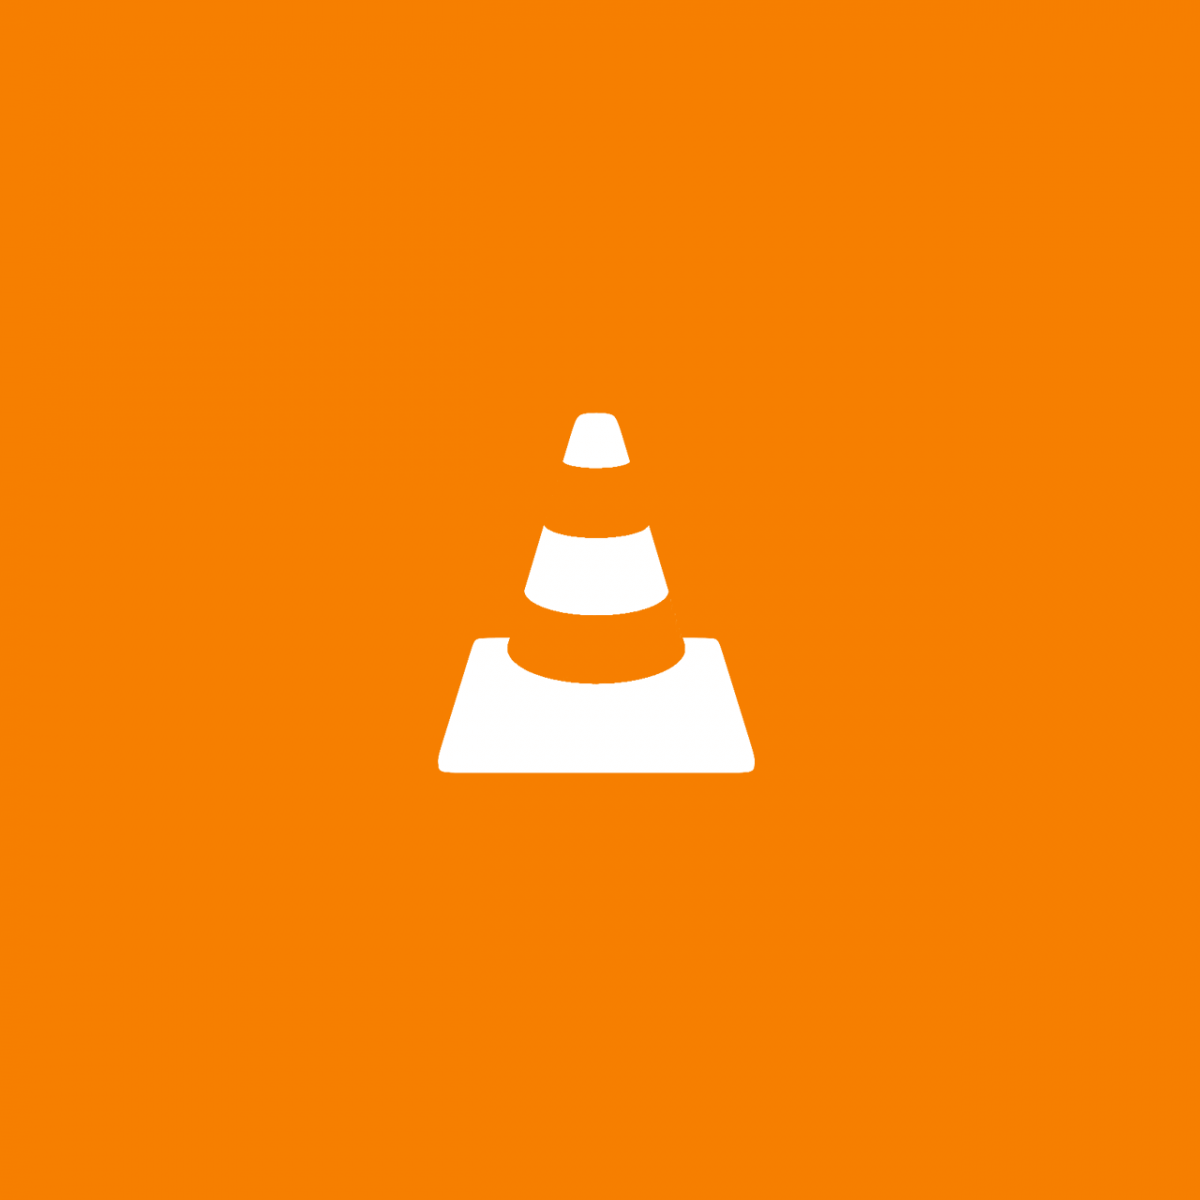 download latest vlc media player for windows 10